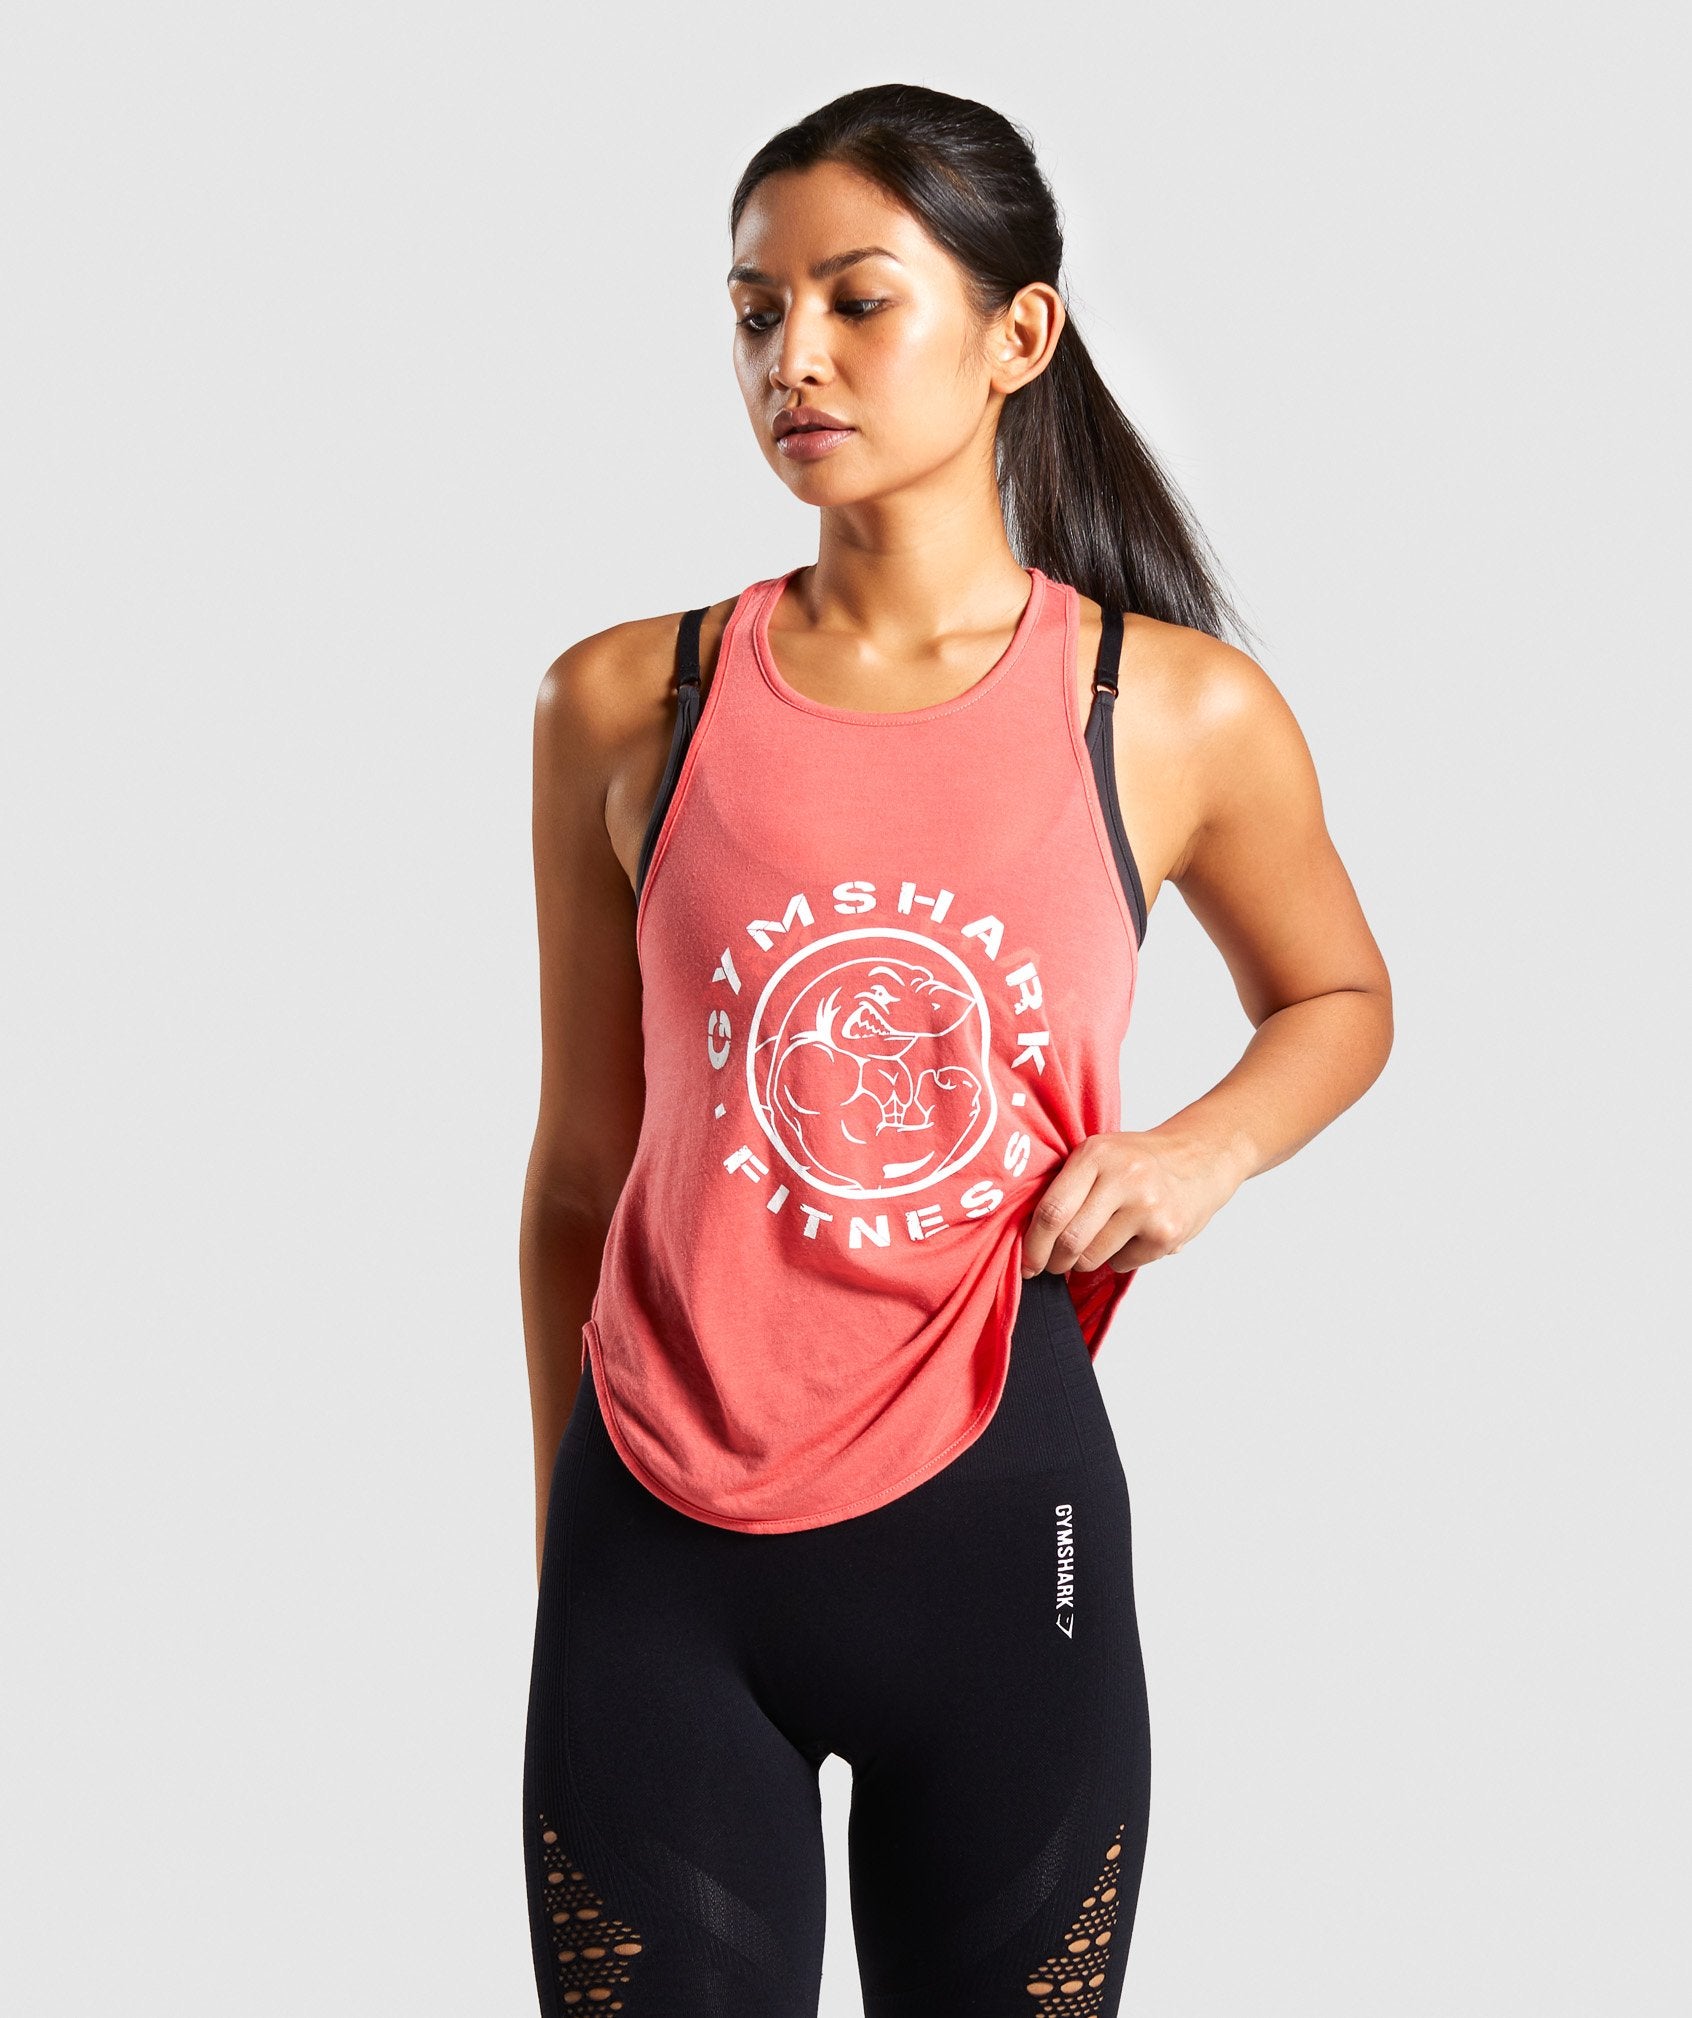 Legacy Fitness Vest in Coral - view 1